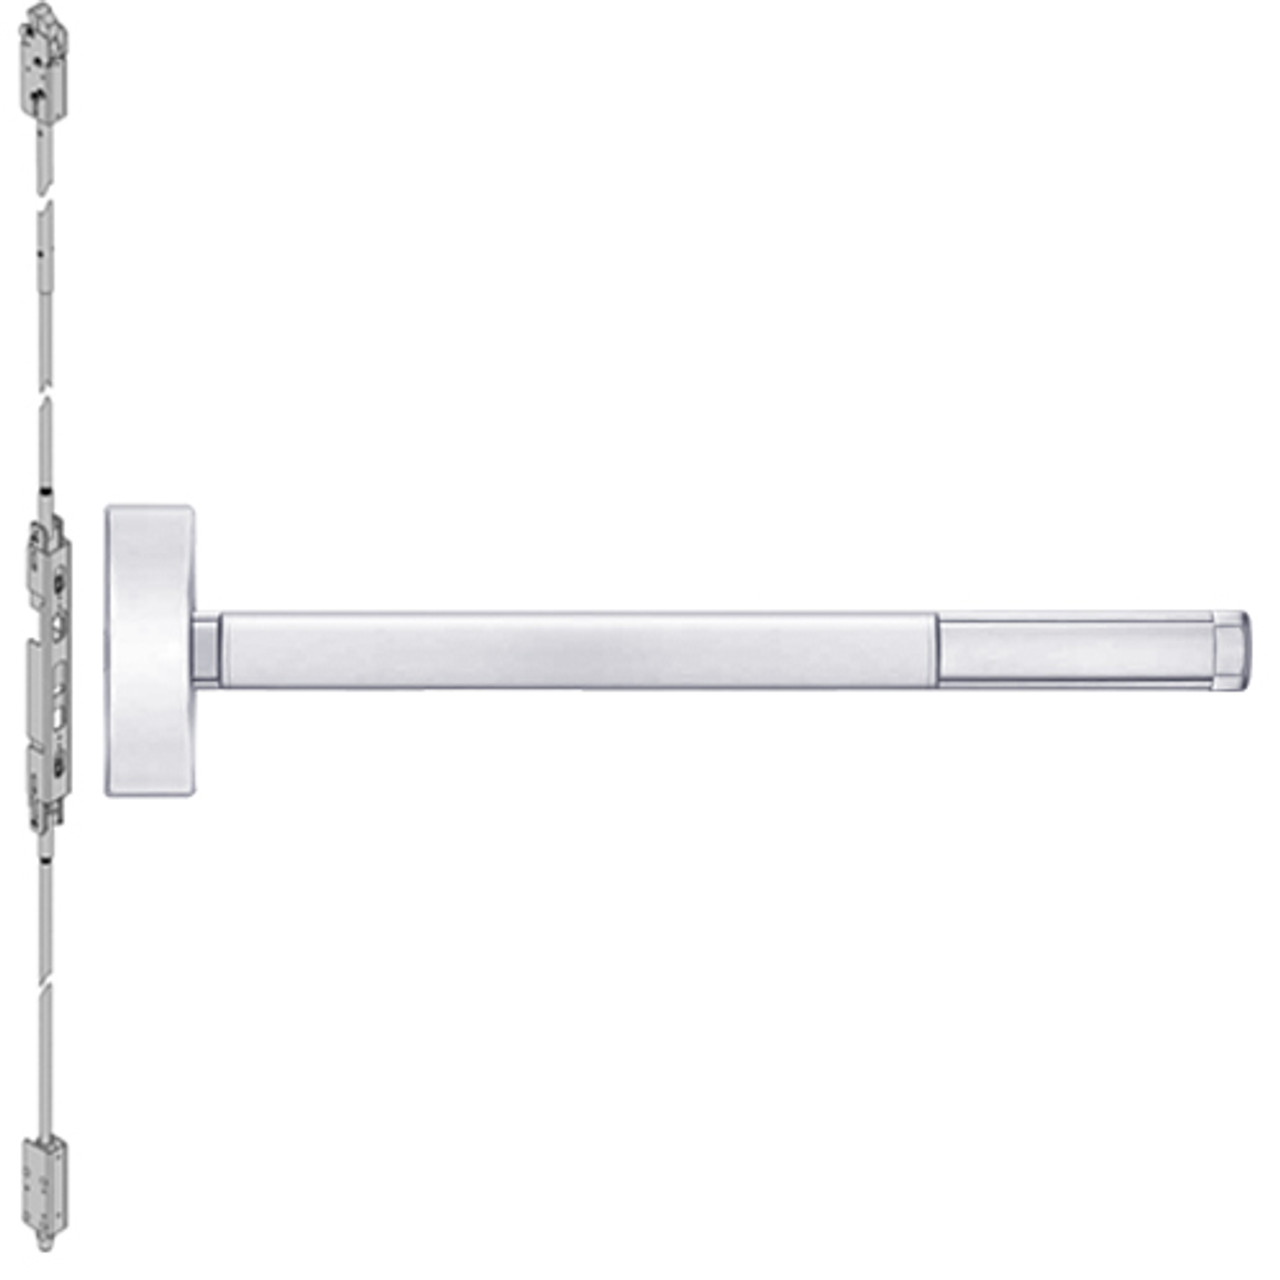 ELRFL2815LBR-625-36 PHI 2800 Series Fire Rated Concealed Vertical Rod Exit Device with Electric Latch Retraction Prepped for Thumbpiece Always Active in Bright Chrome Finish